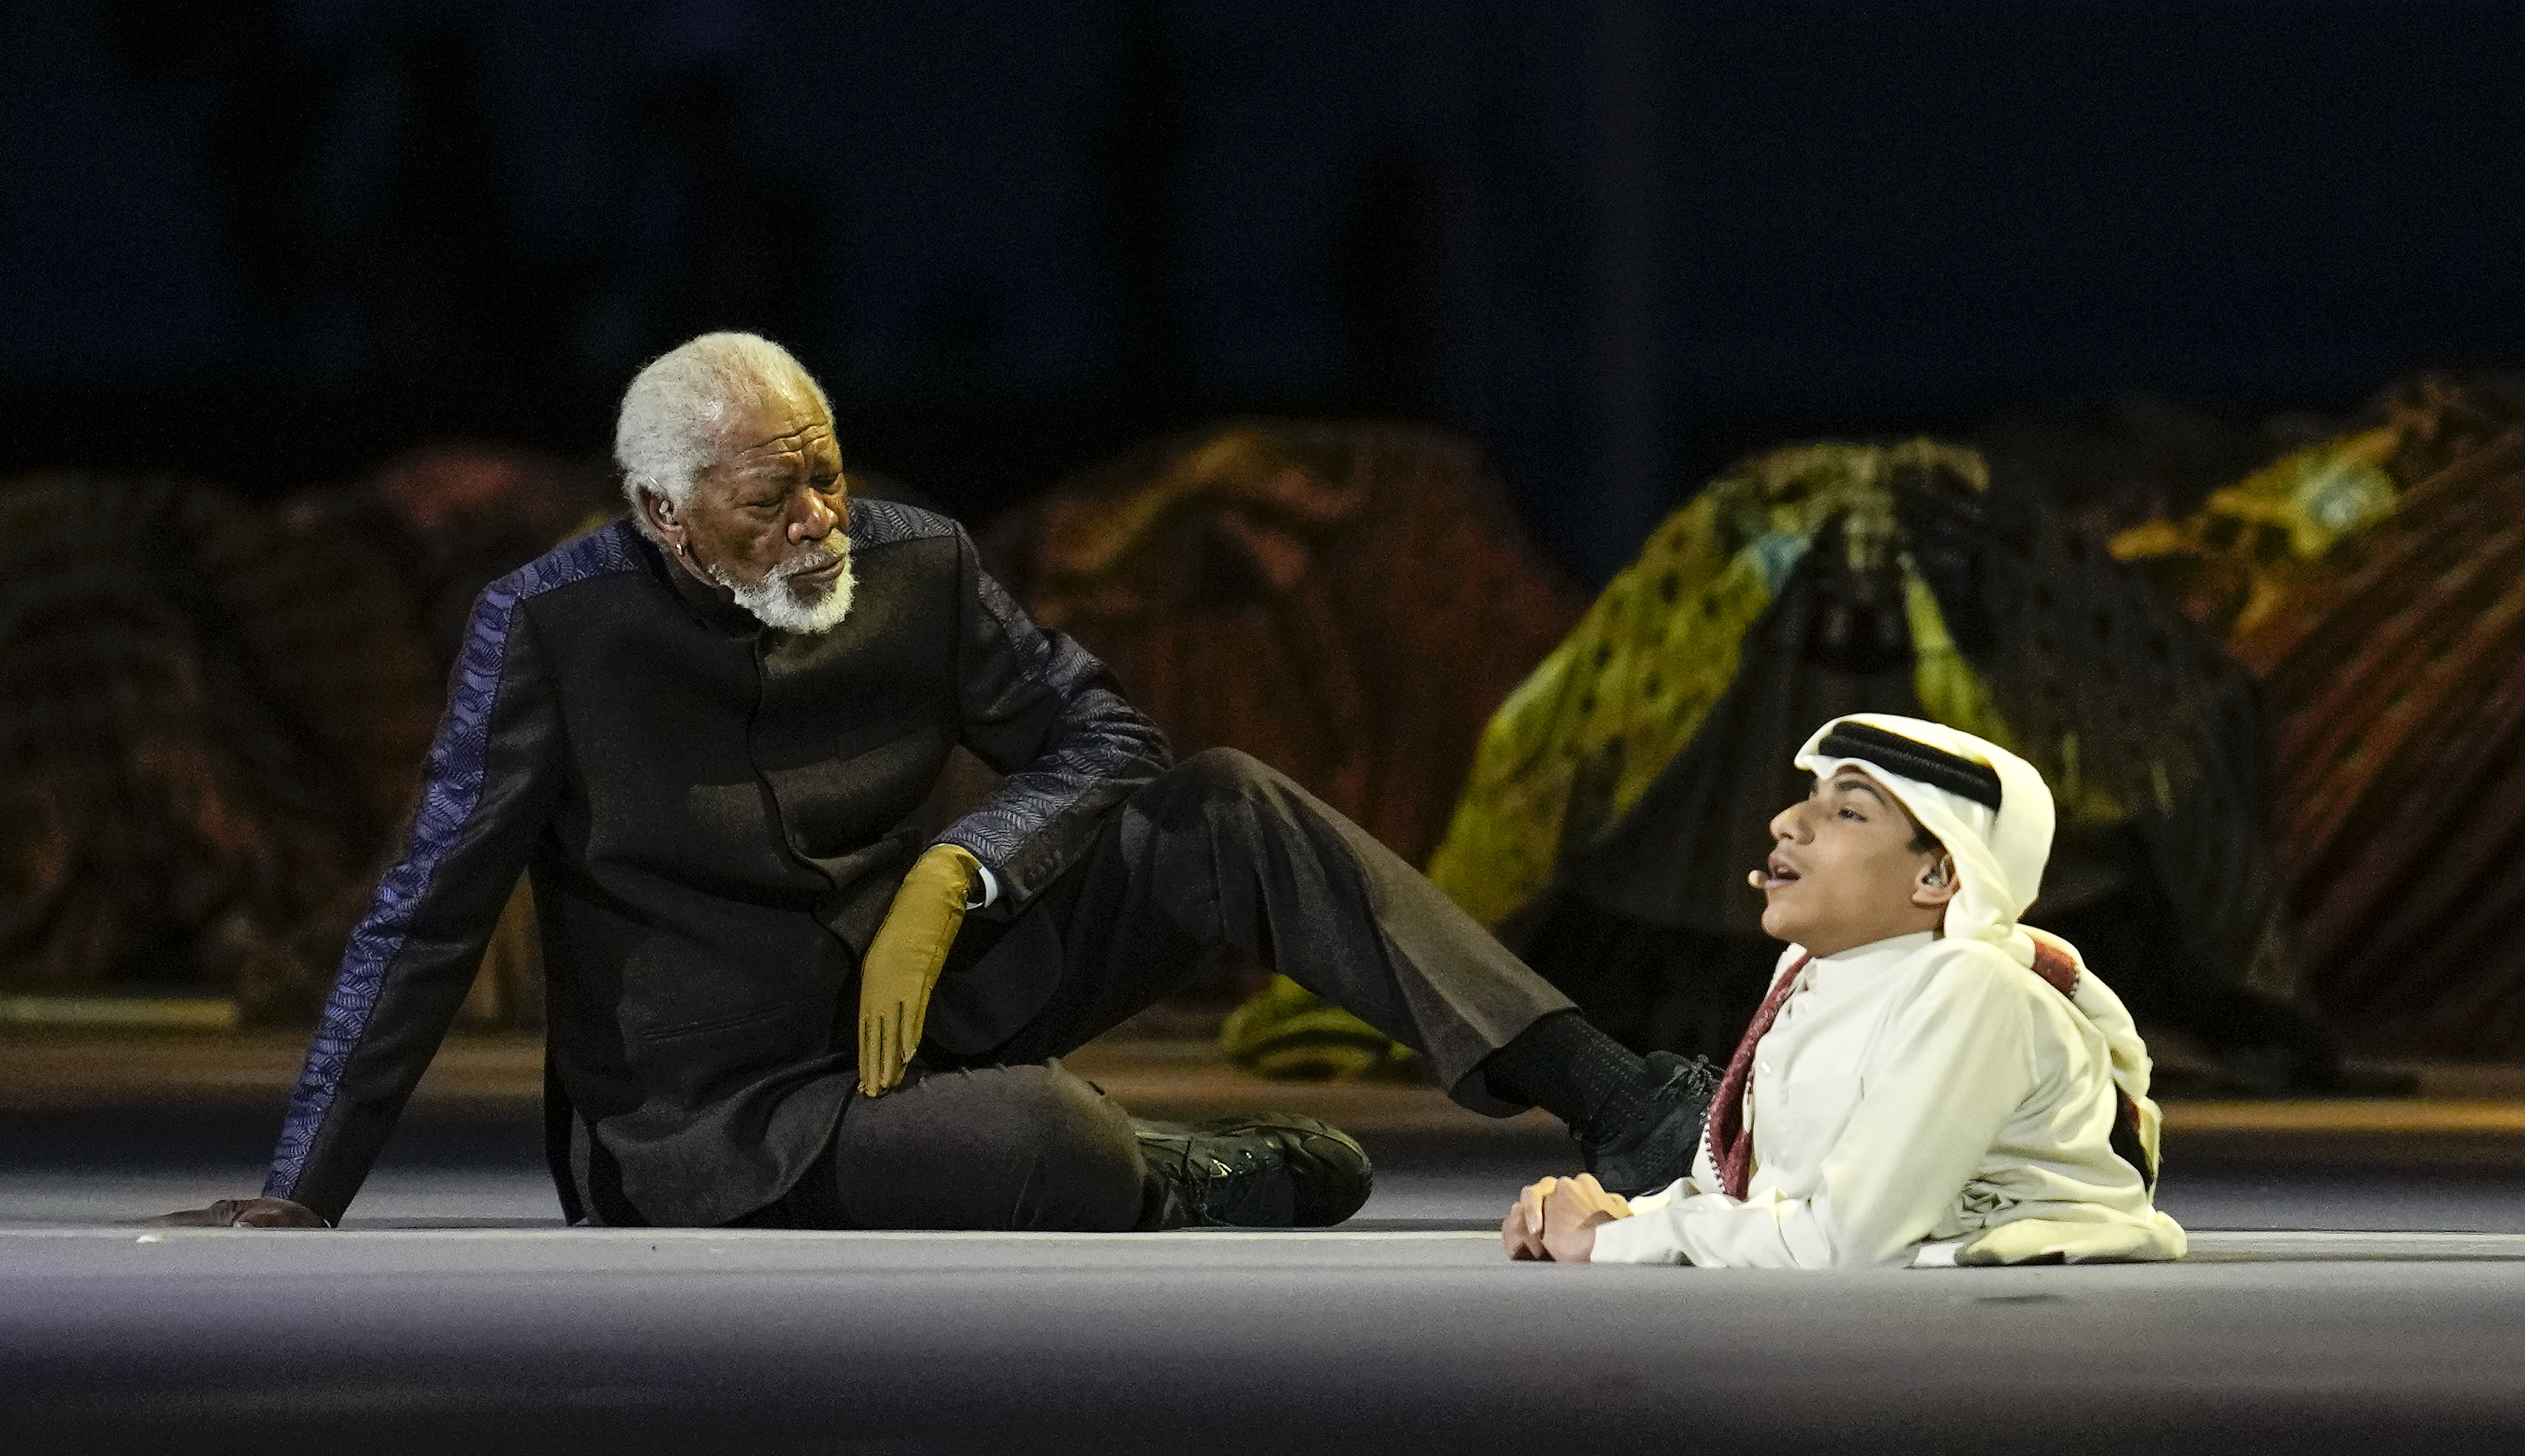 Actor Morgan Freeman, left, sits on the stage during the opening ceremony prior to the World Cup match between Qatar and Ecuador at the Al Bayt Stadium in Al Khor.